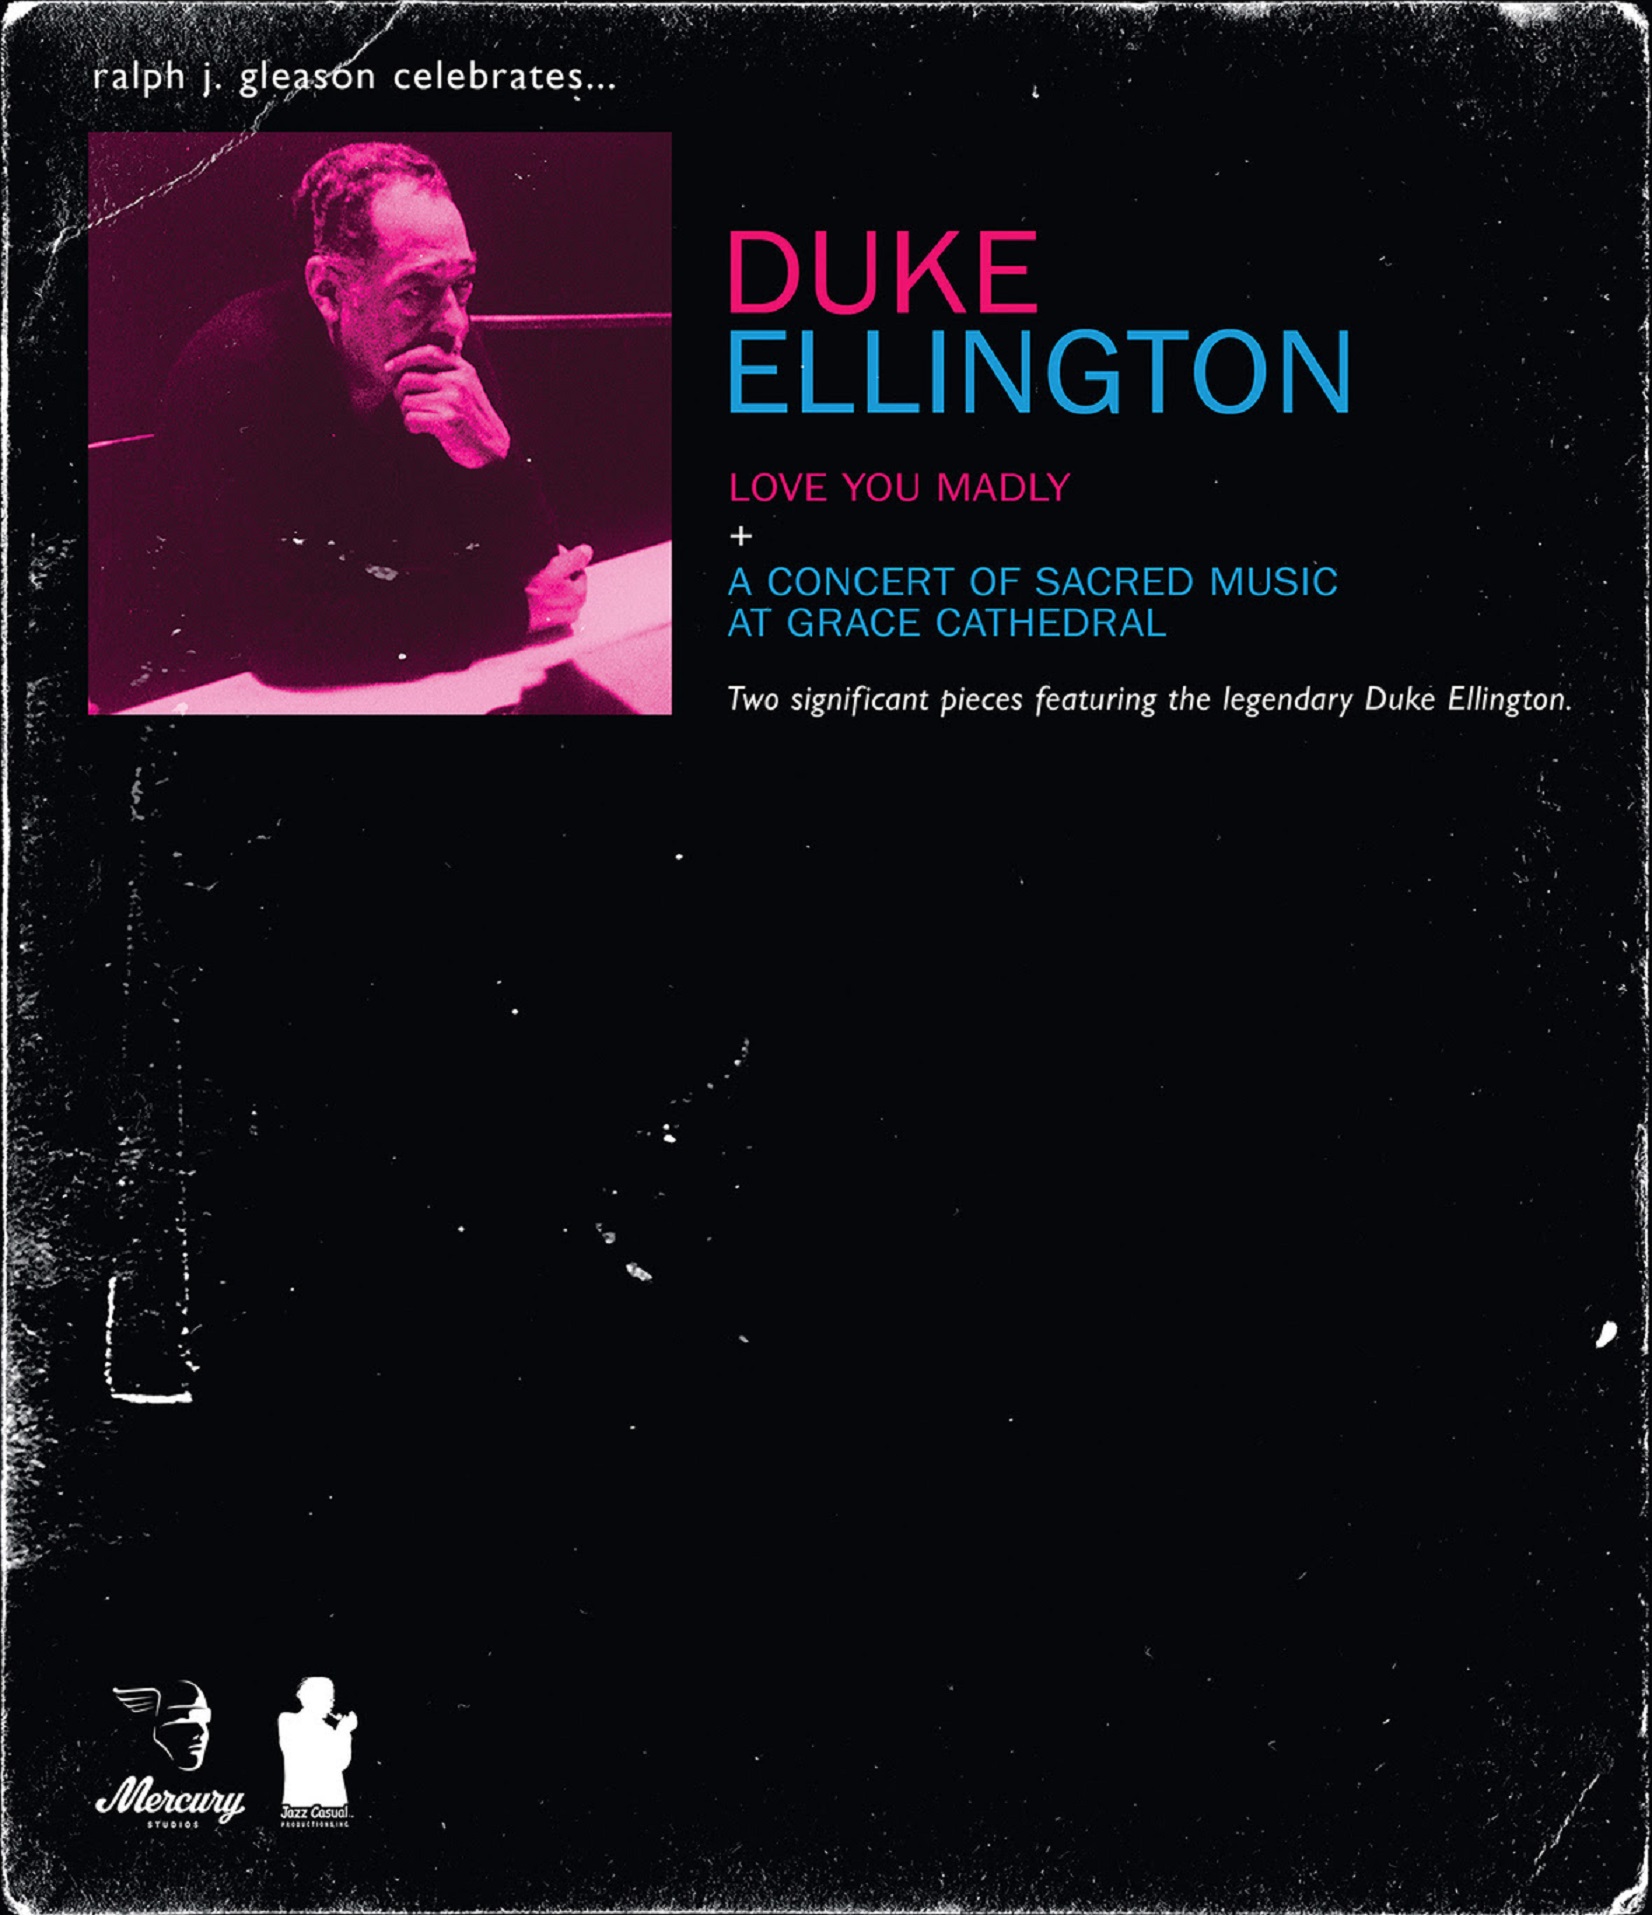 Duke Ellington Love You Madly + A Concert of Sacred Music At Grace Cathedral Out April 28, 2023